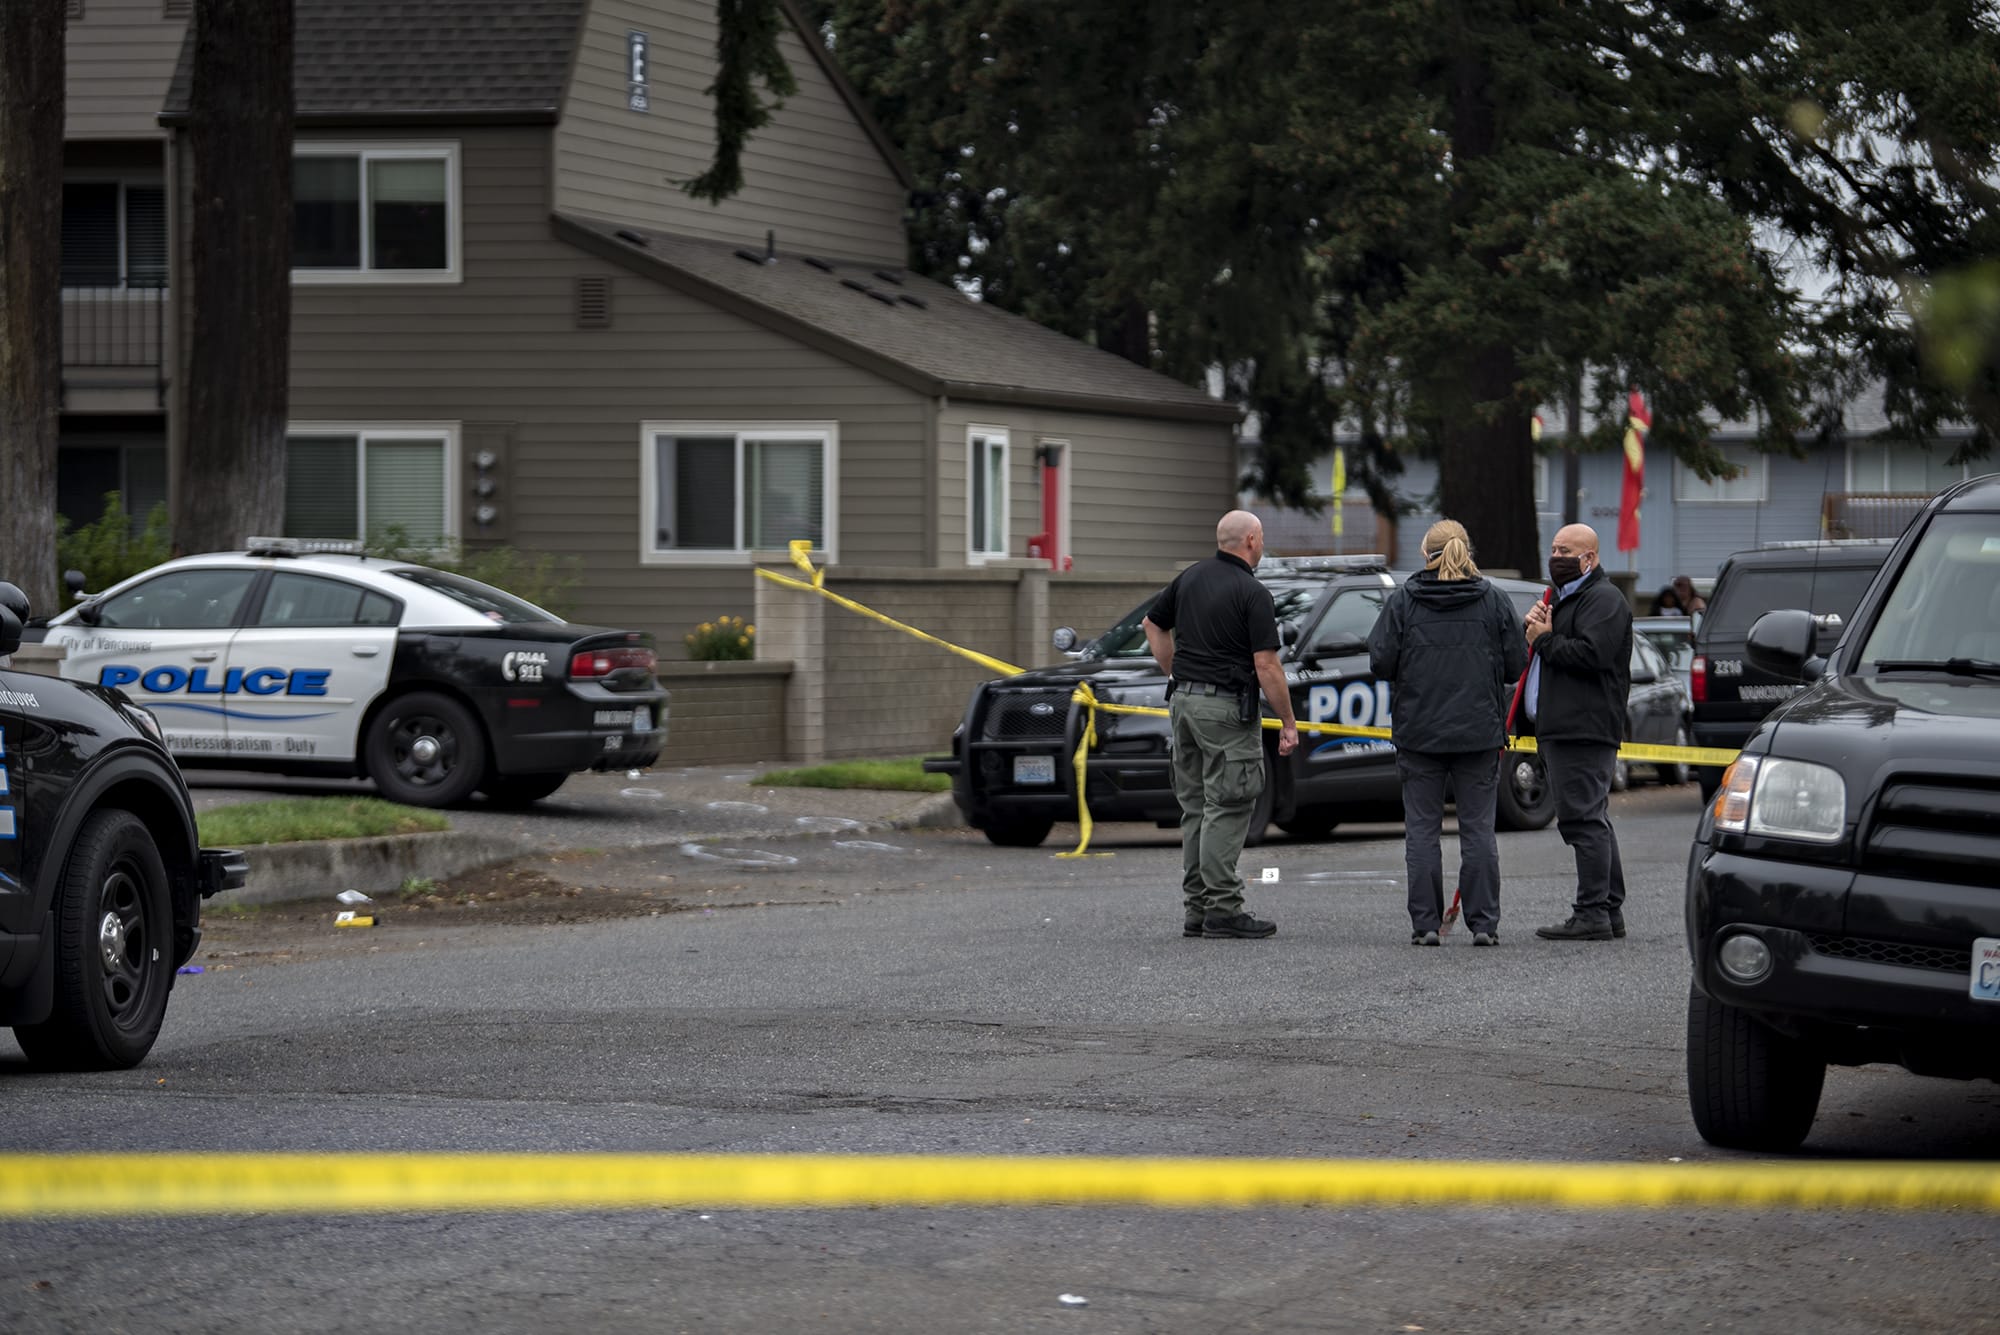 Officials investigate after a domestic violence investigation resulted in a non-fatal police shooting in Vancouver's Rose Village neighborhood on Monday morning, Oct. 5, 2020.